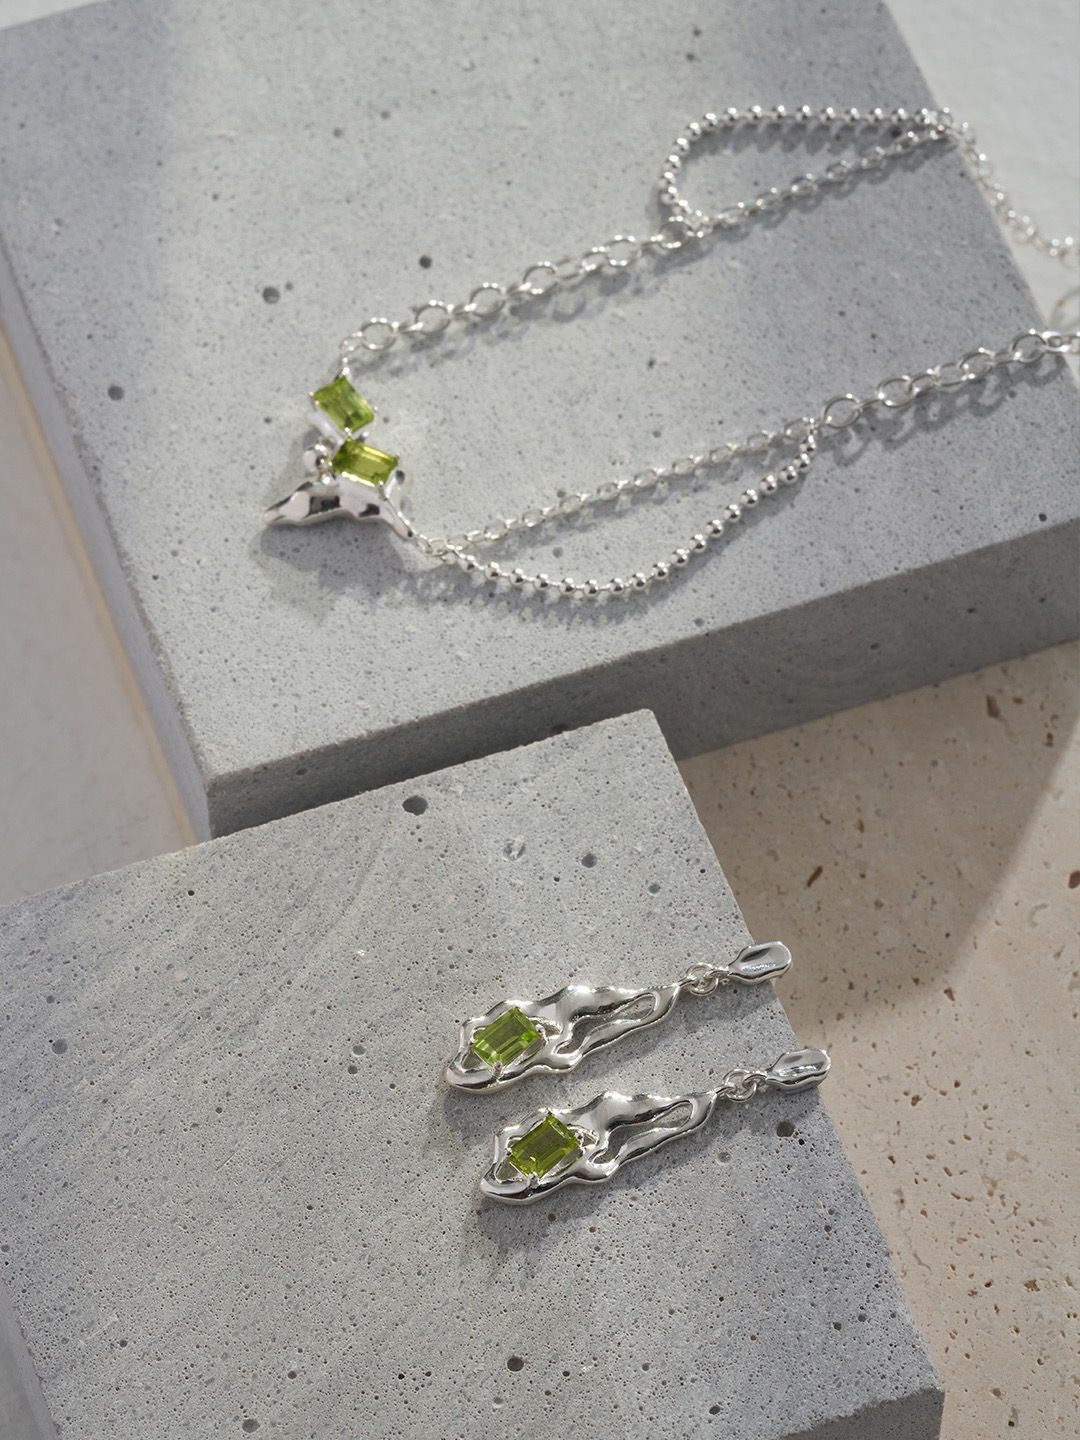 Green Peridot Drop Earrings with Pear-Shaped Genuine Peridot Gemstones and Sterling Silver Lever-Back Clasp"